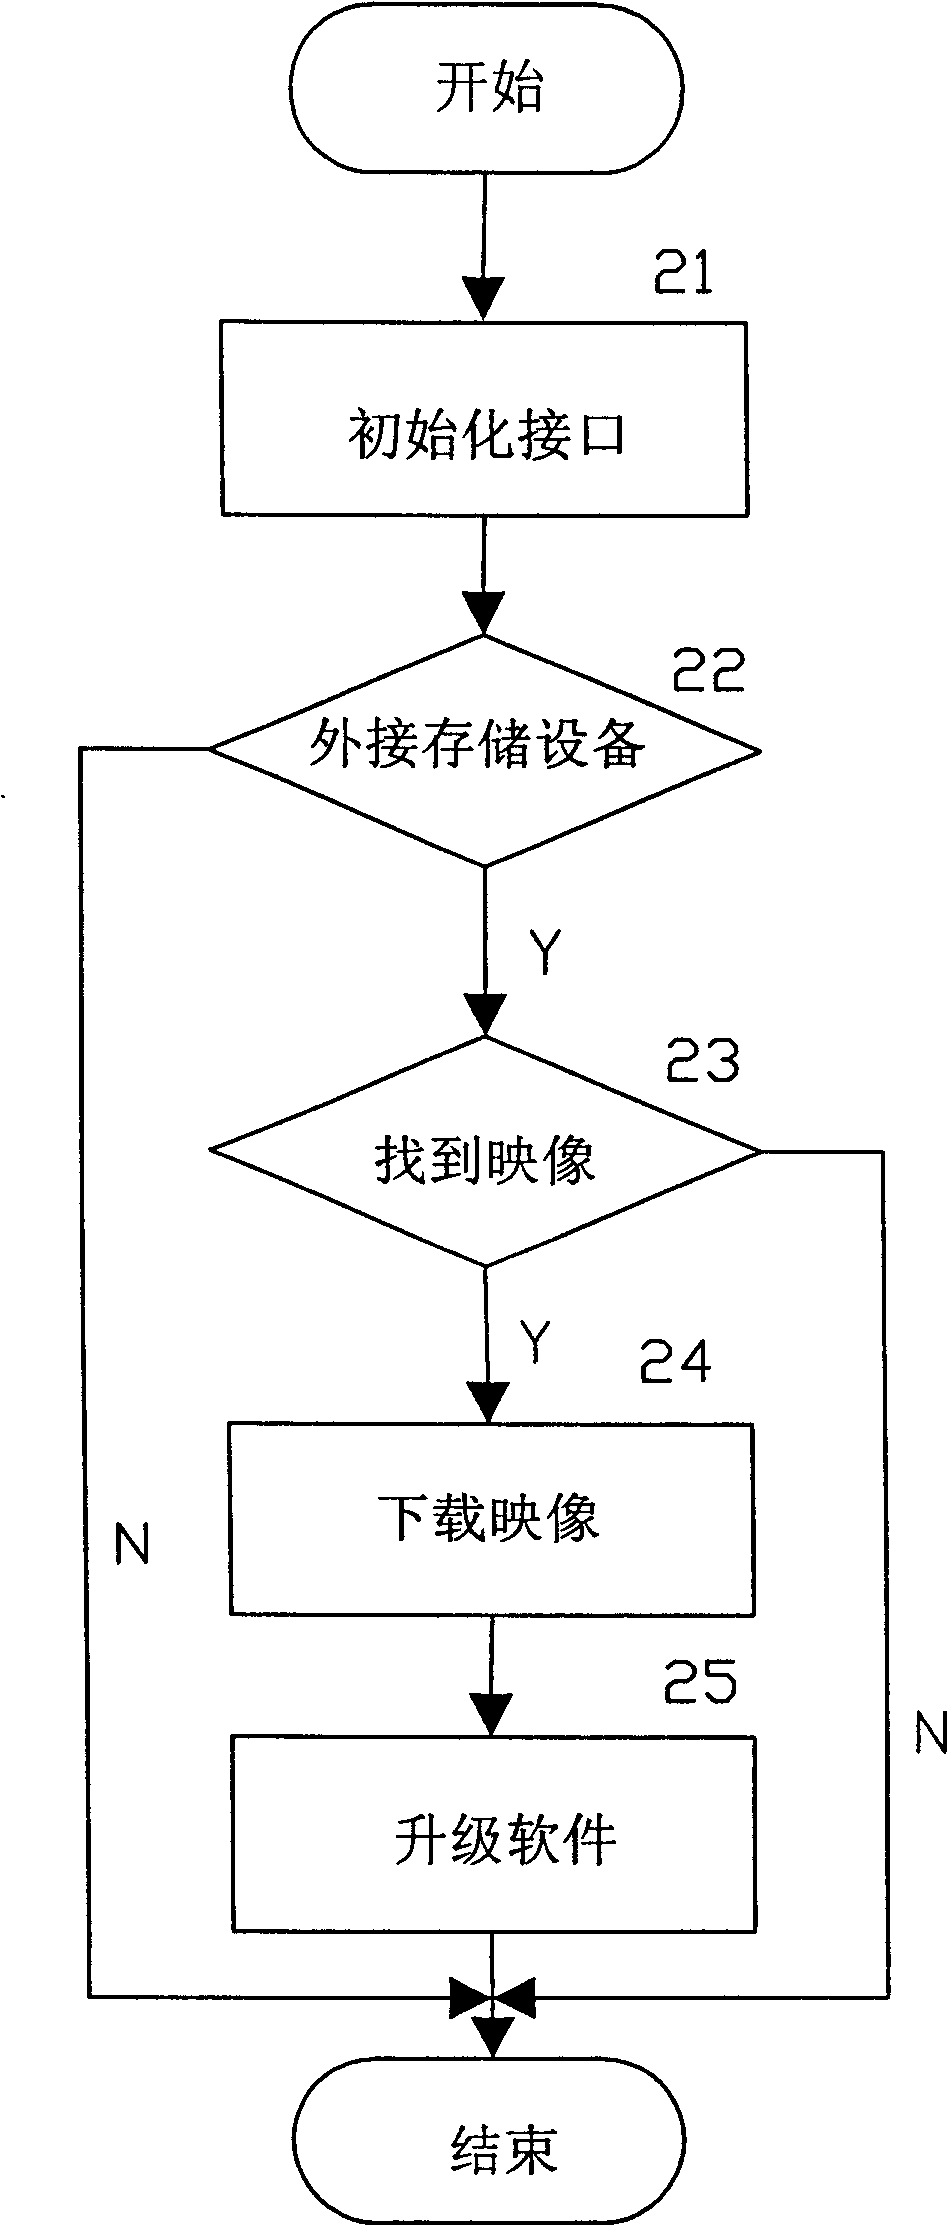 TV set setting USB/memory card interface and its software upgrading method